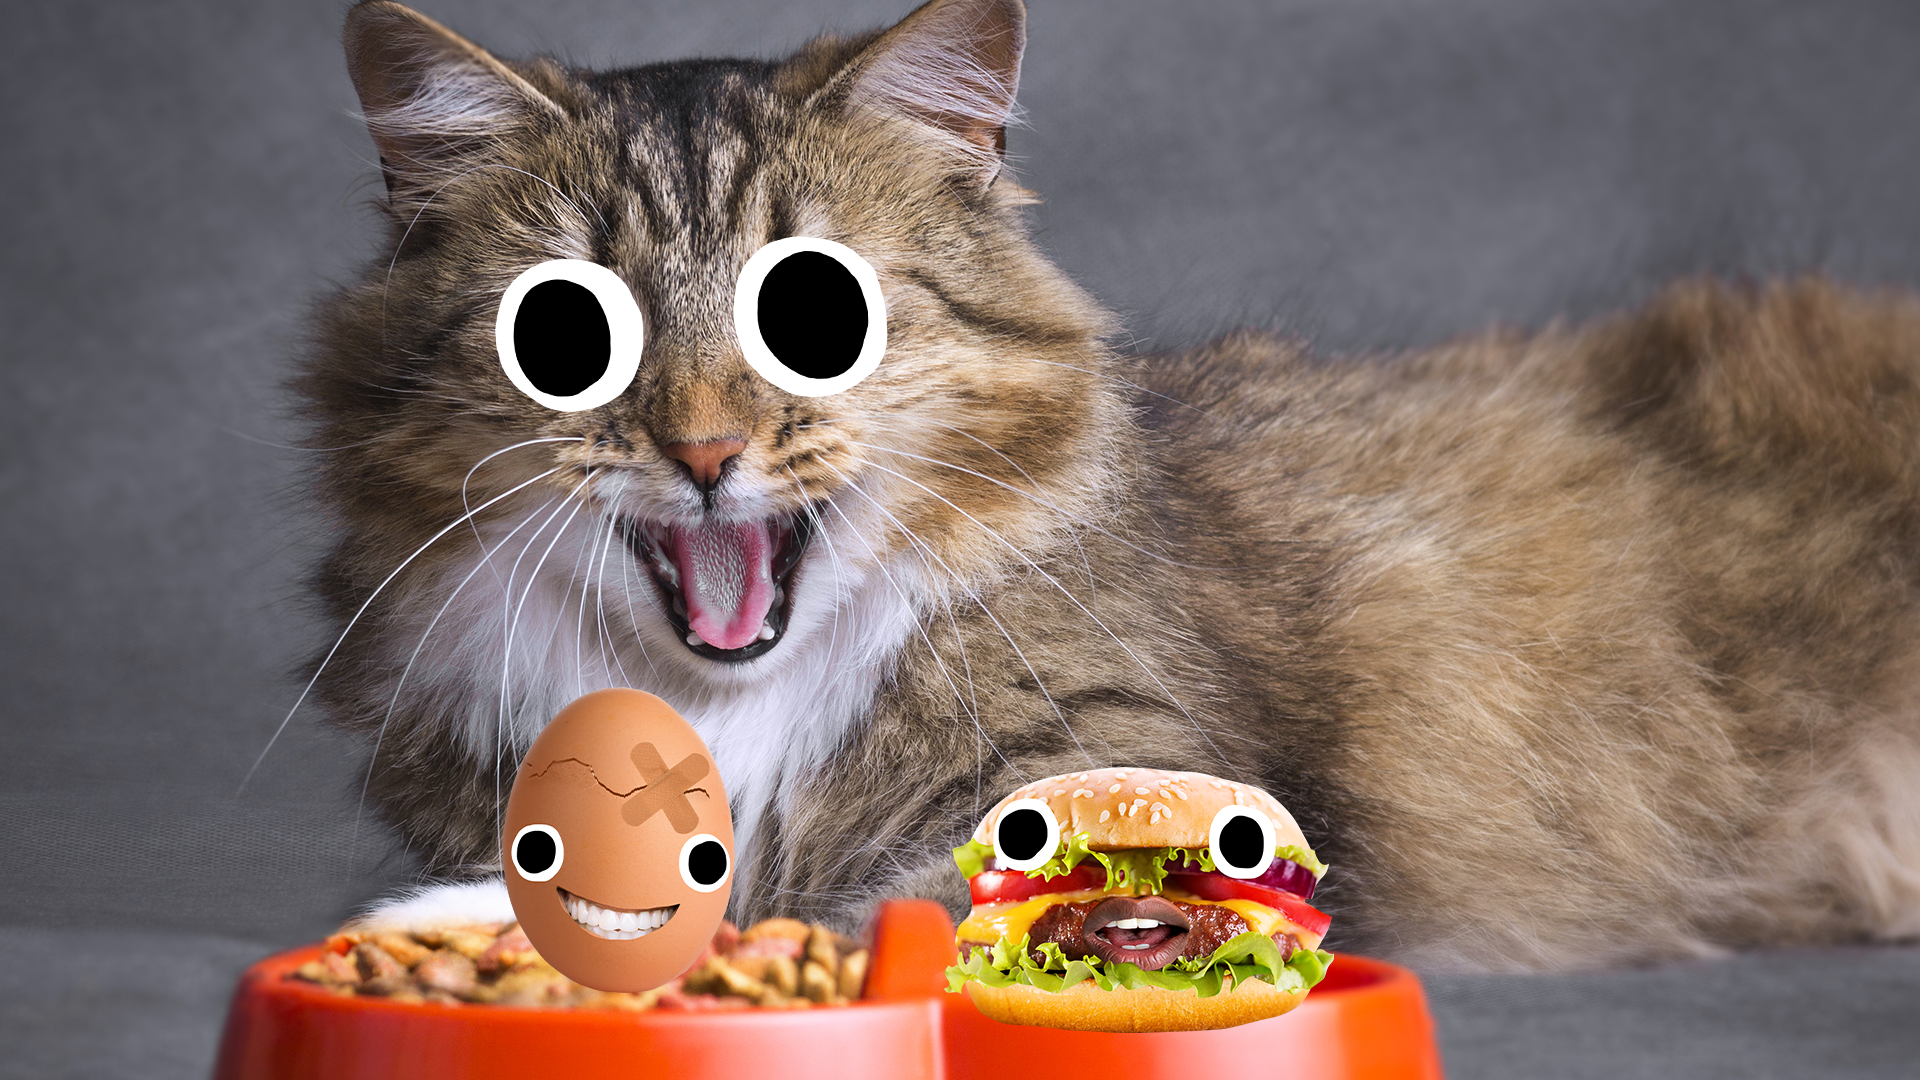 A cat with a bowl of cat food, an egg and a burger